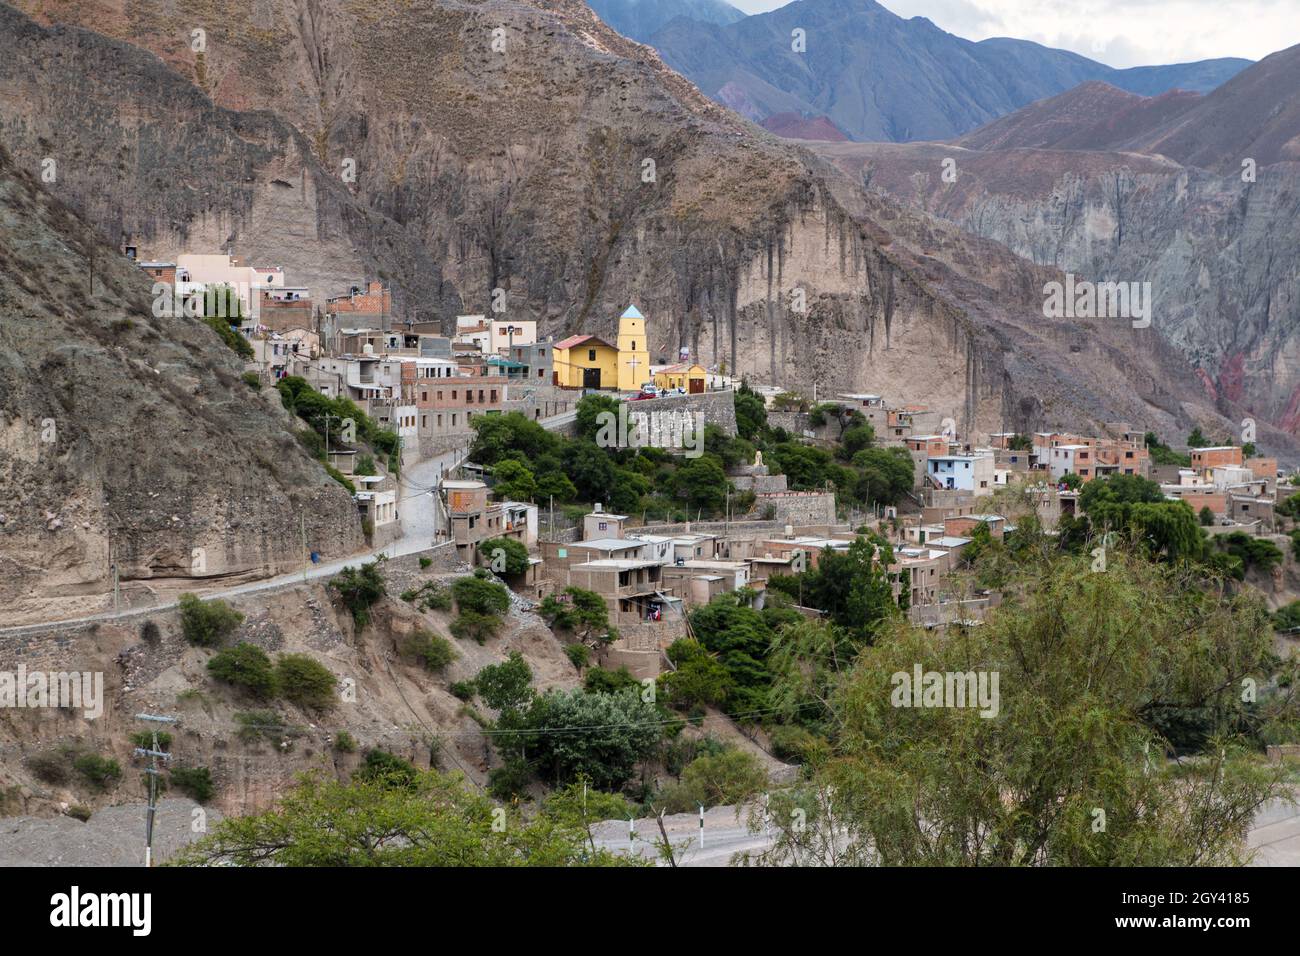 Iruya, seen from afar from the town on the outskirts of Salta, in northern Argentina. Stock Photo